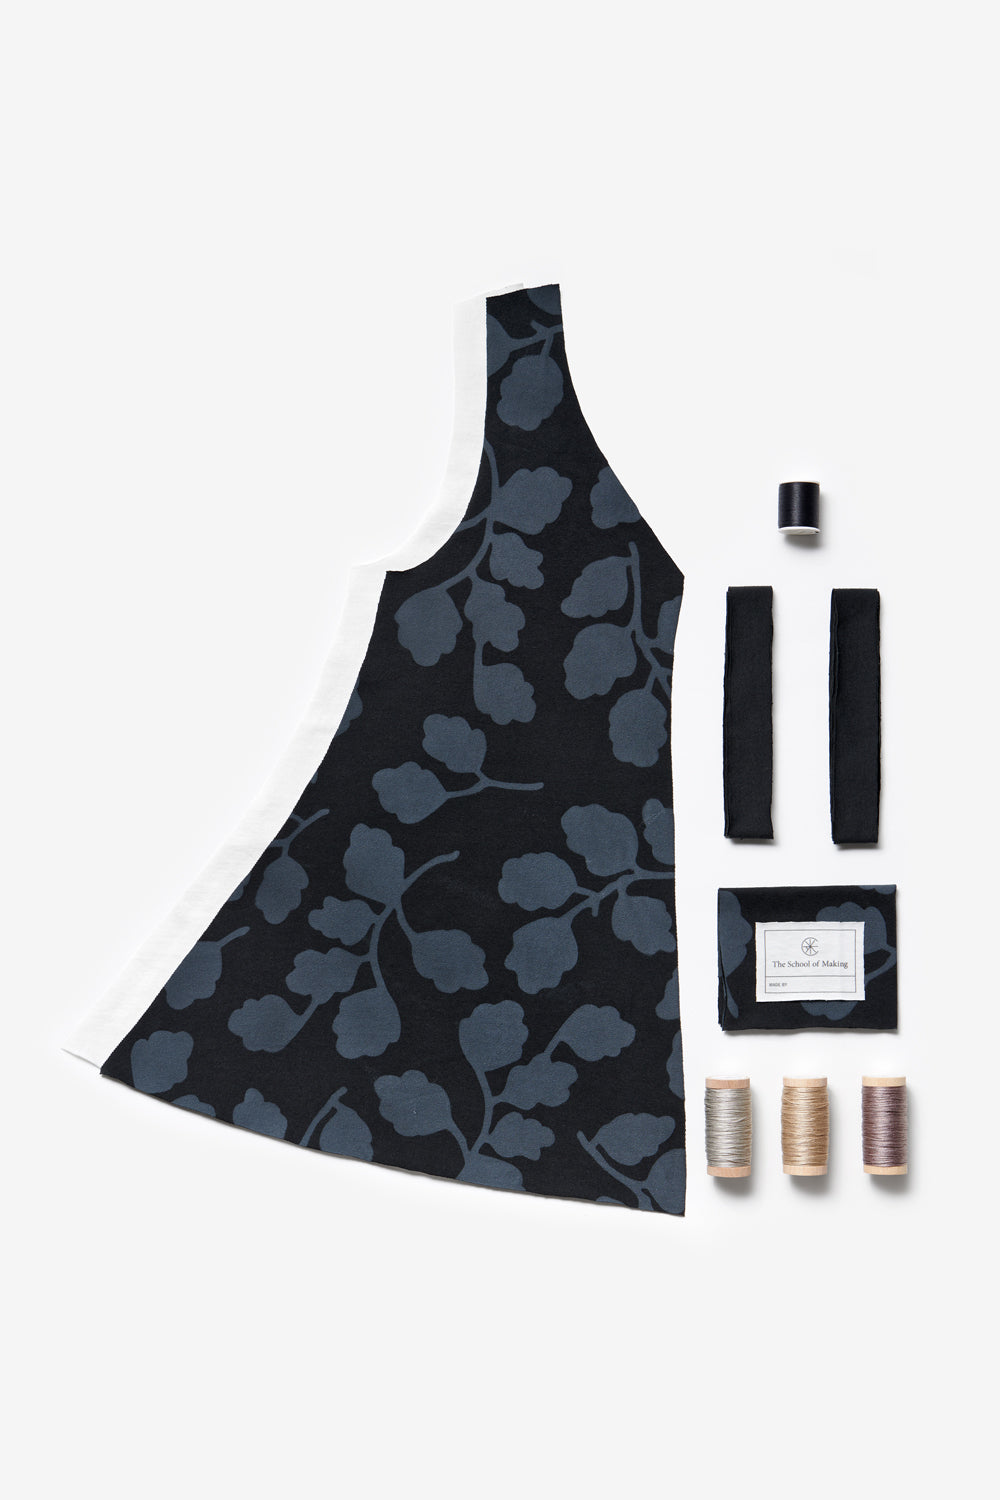 The School of Making A-Line Top and Tunic Kit with New Leaves Design in Black